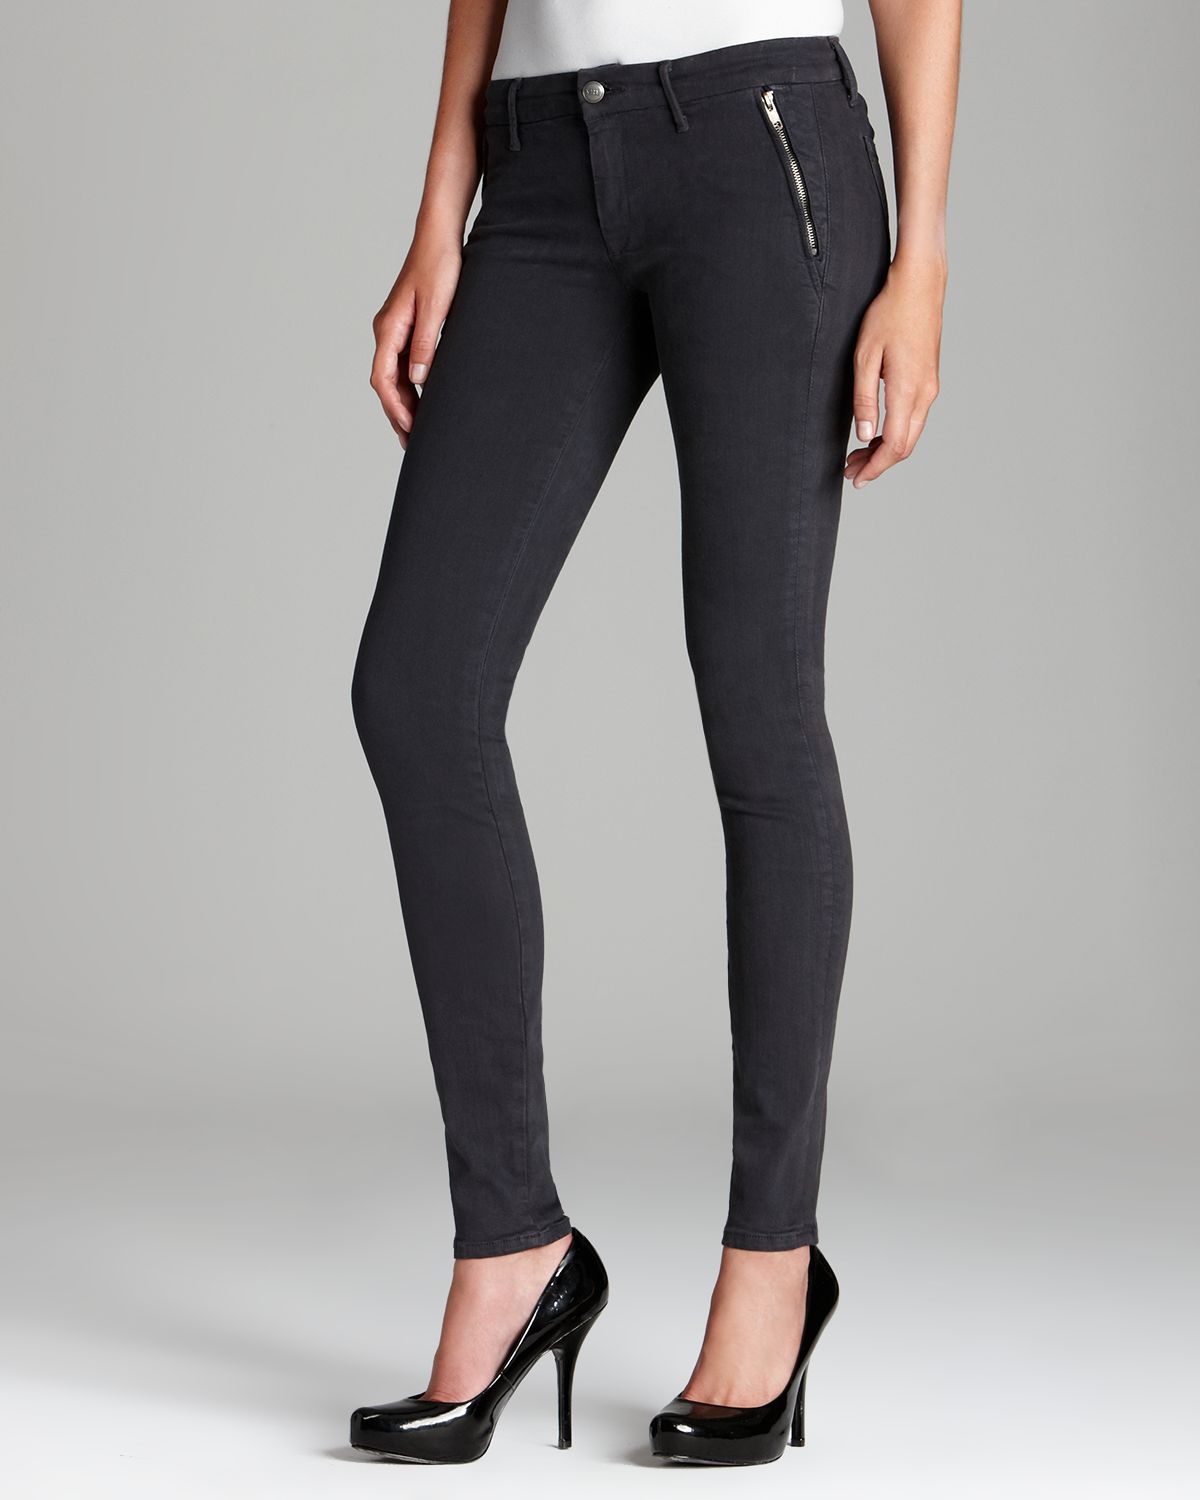 Koral Jeans Skinny Trouser in Charcoal in Gray (Charcoal) | Lyst